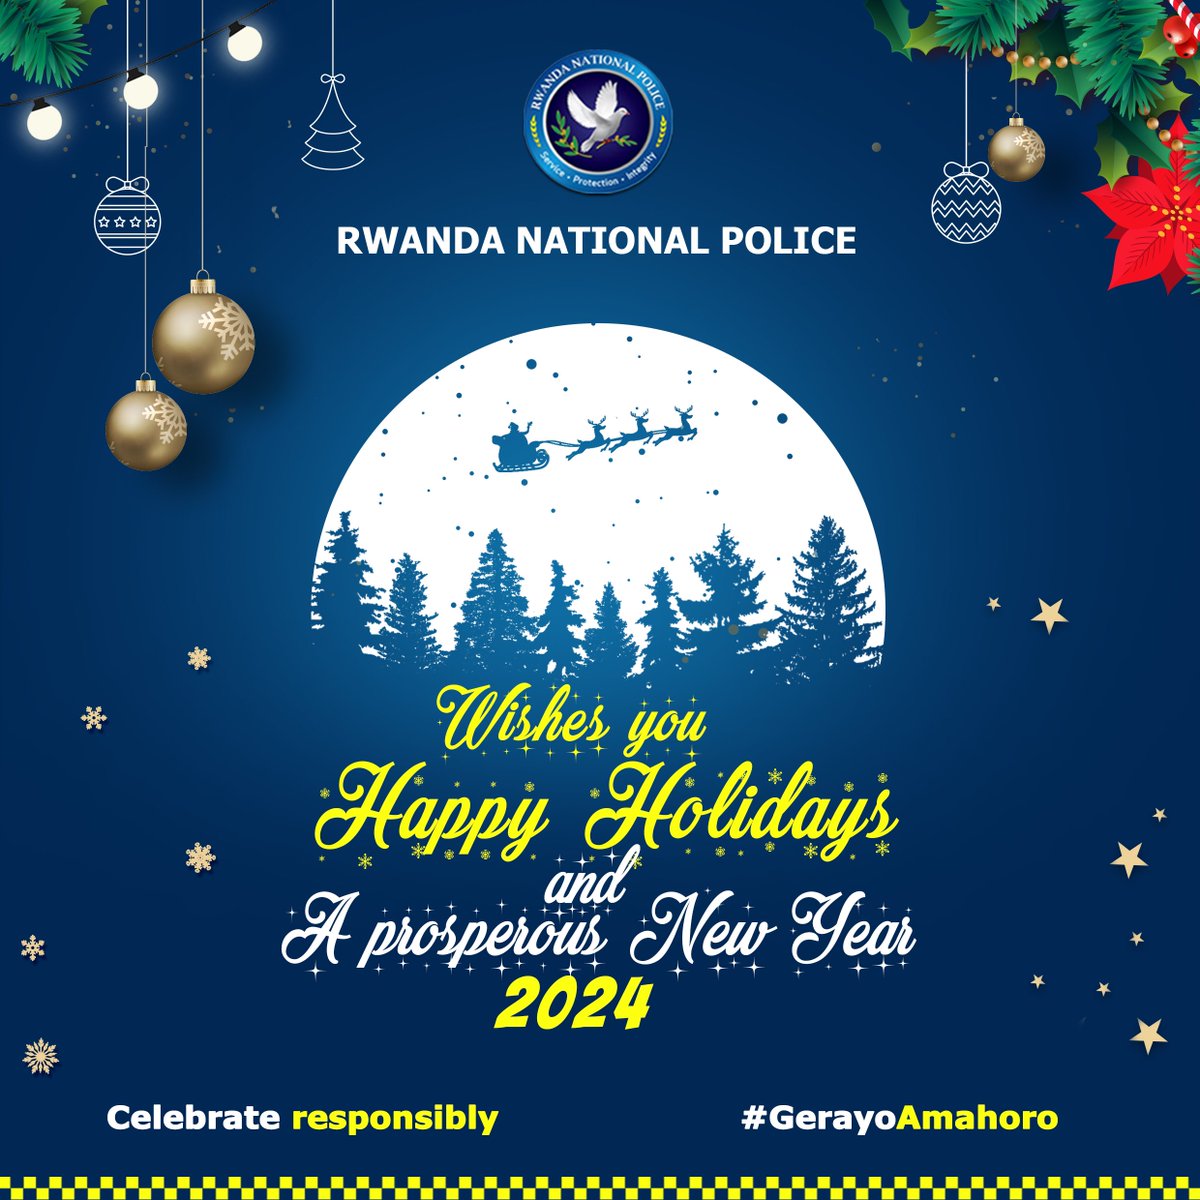 Happy festive season and a prosperous New year! Celebrate Responsibly.